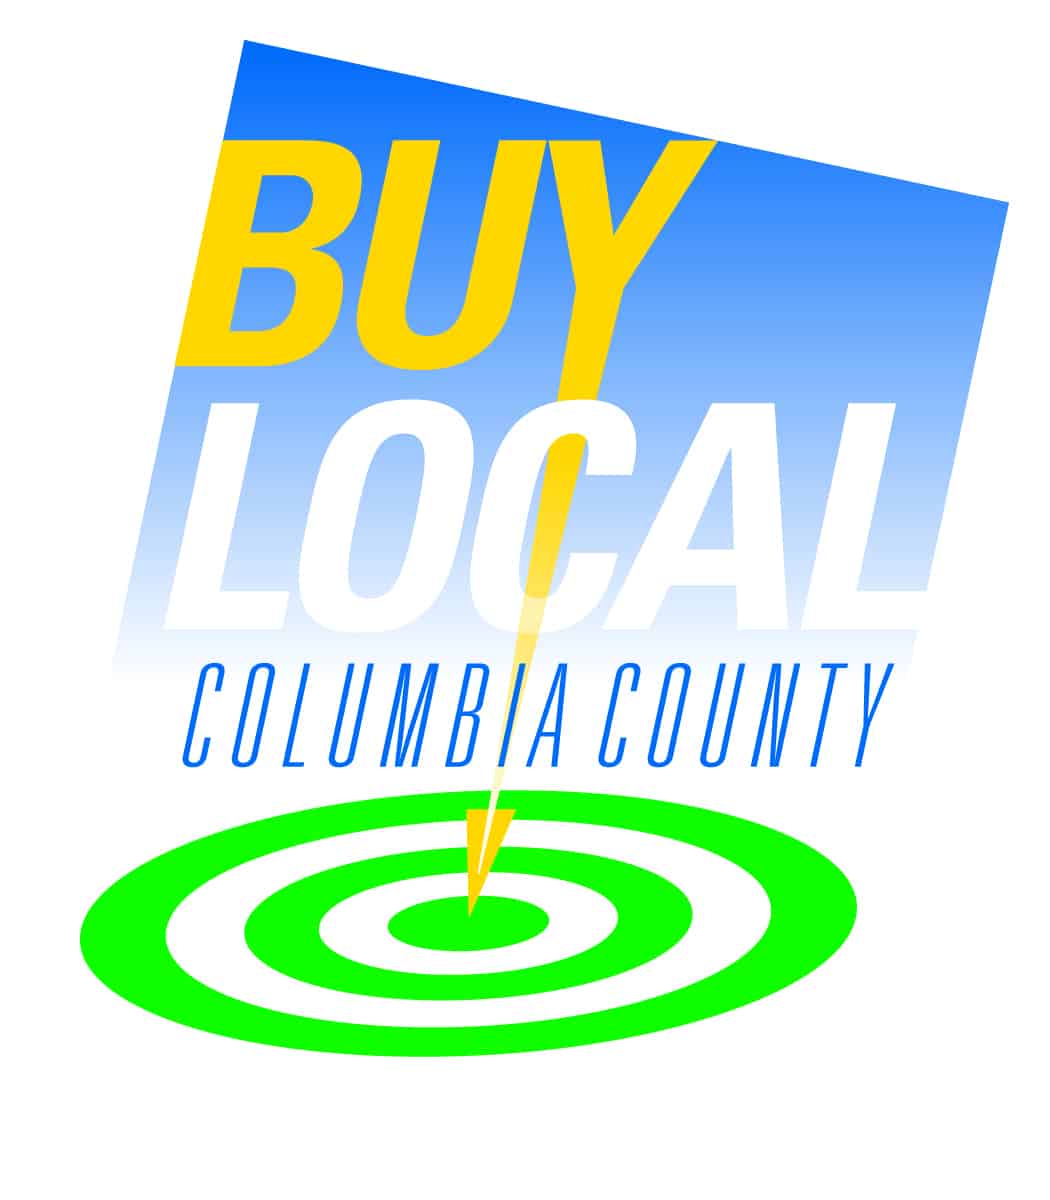 Buy Local Expo – September 27 from 4:00 – 7:00 at Basilica Hudson